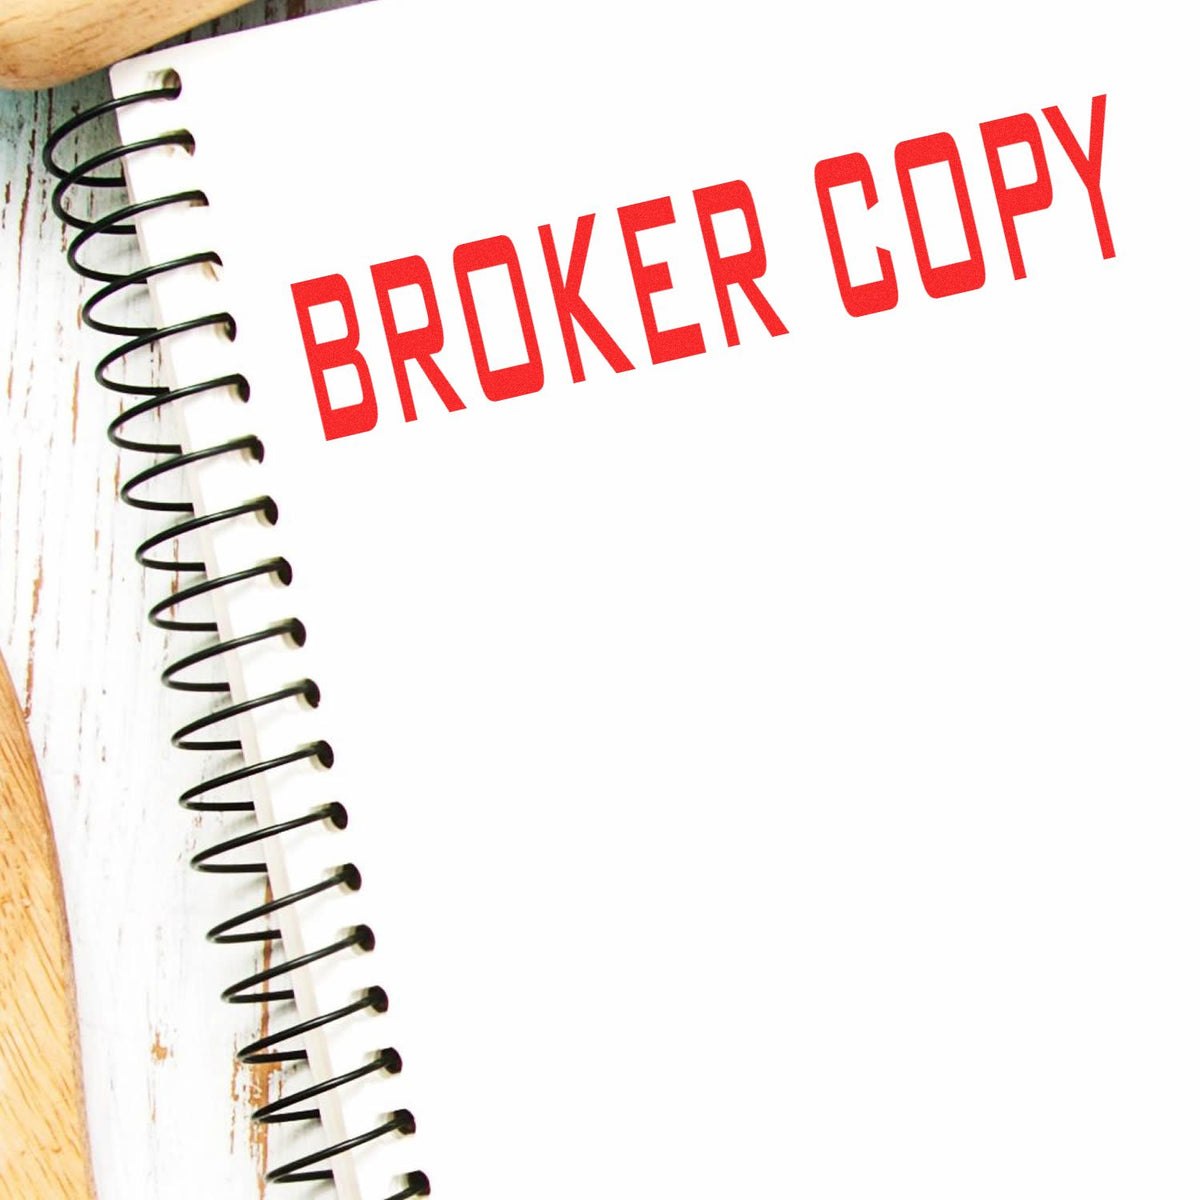 Large Broker Copy Rubber Stamp In Use Photo